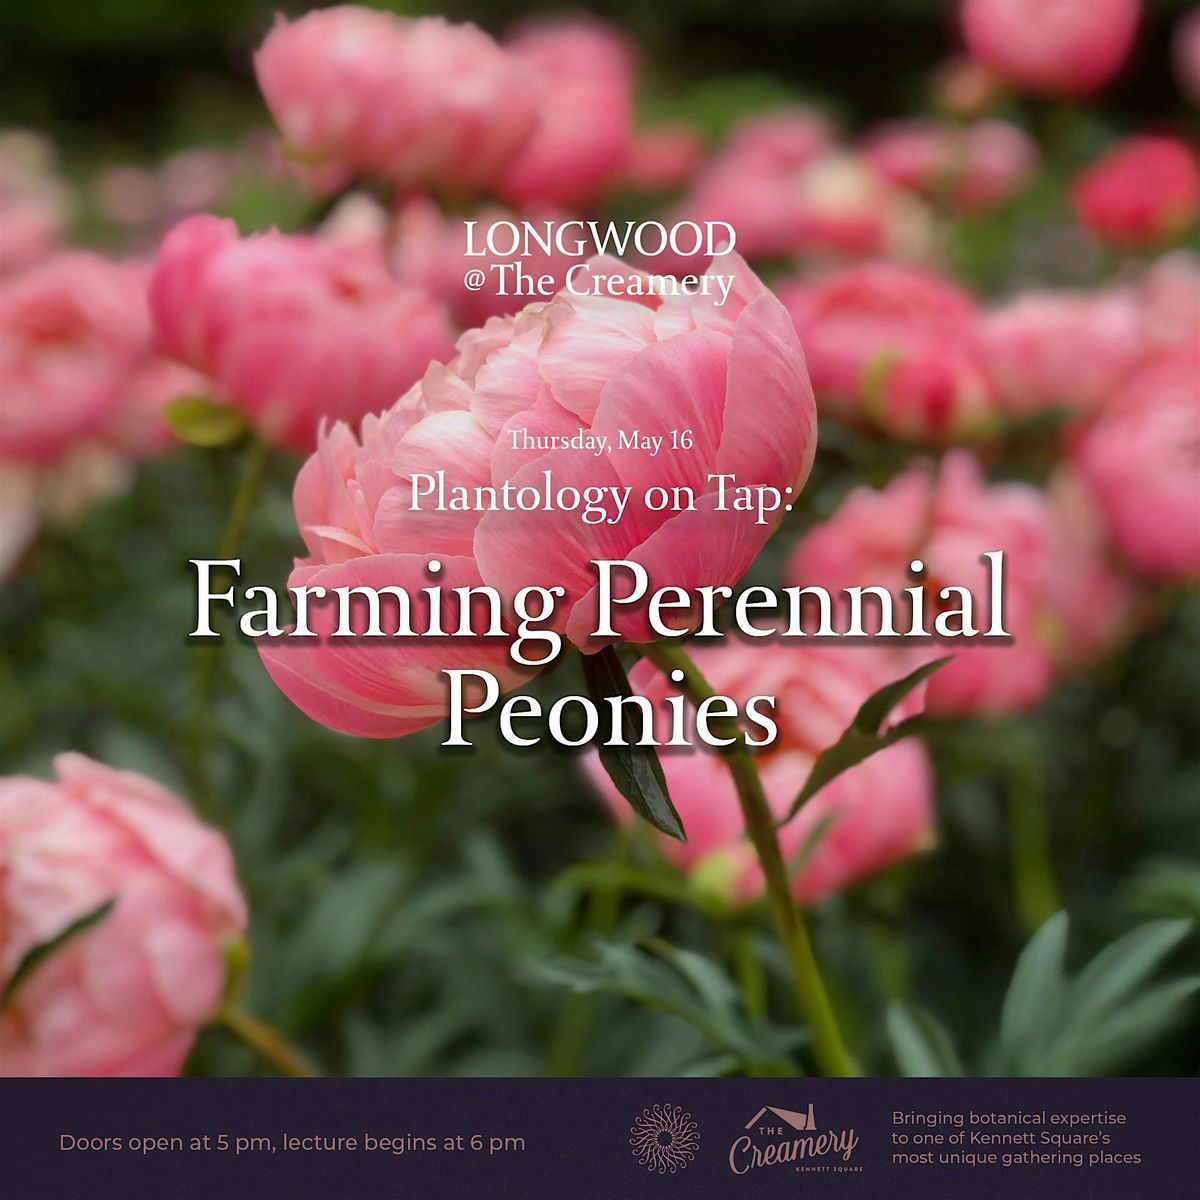 Longwood at The Creamery - Plantology on Tap - Farming Perennial Peonies